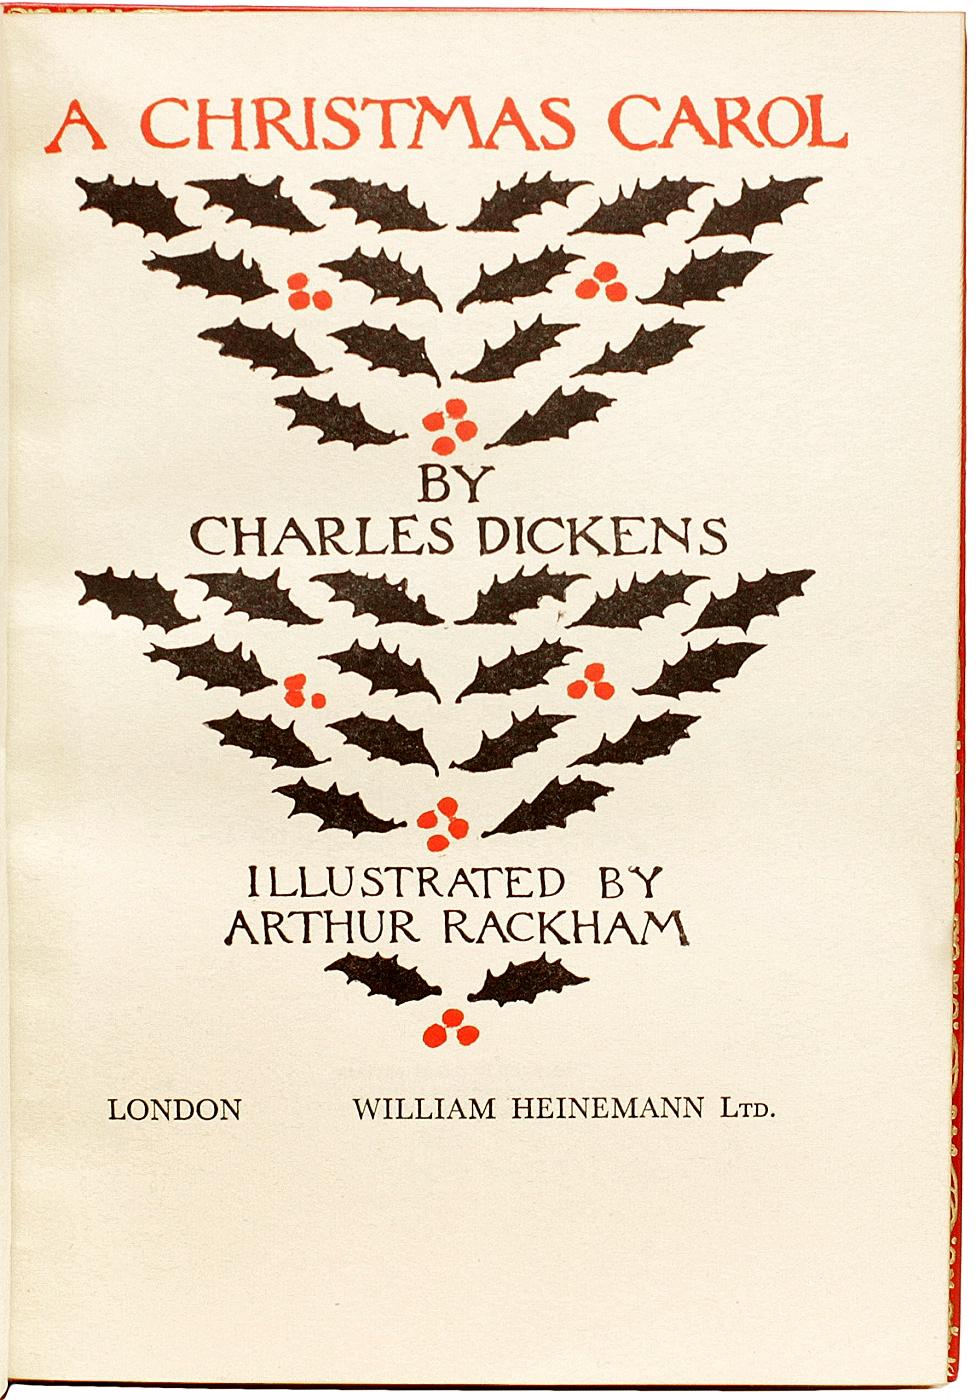 British Dickens, Charles. a Christmas Carol - ILLUSTRATED BY ARTHUR RACKHAM For Sale